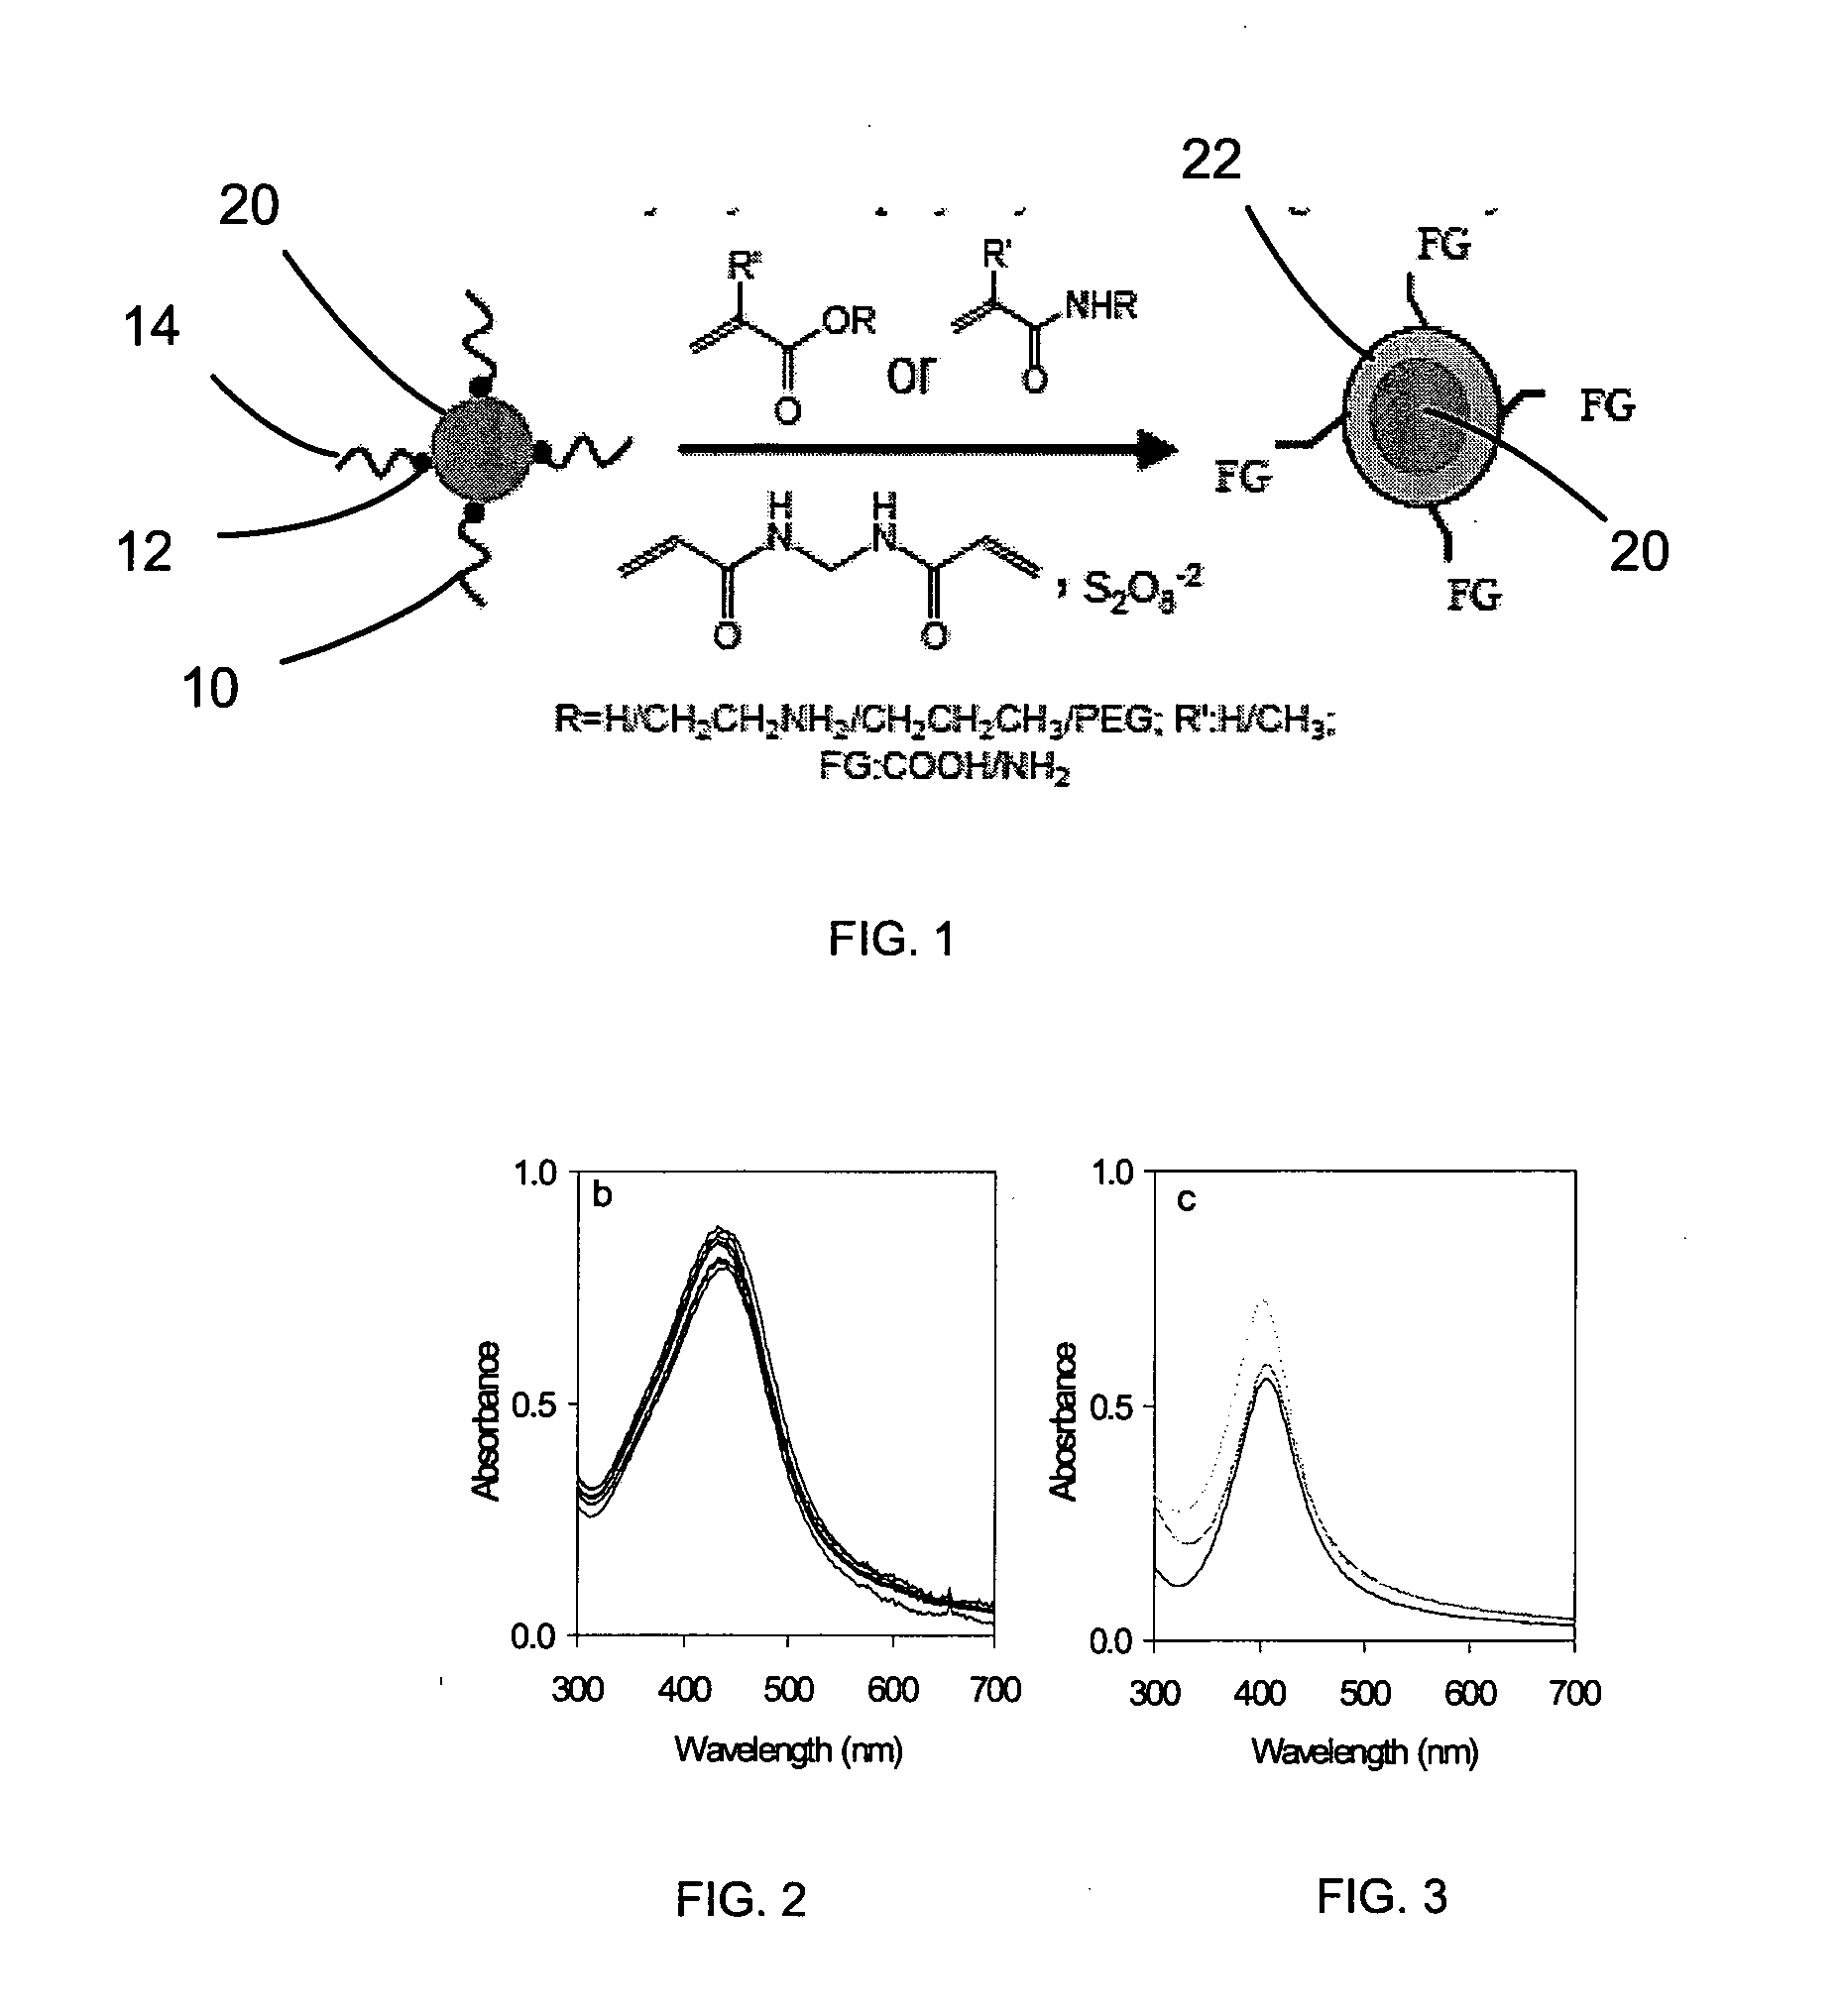 Polymerization on particle surface with reverse micelle